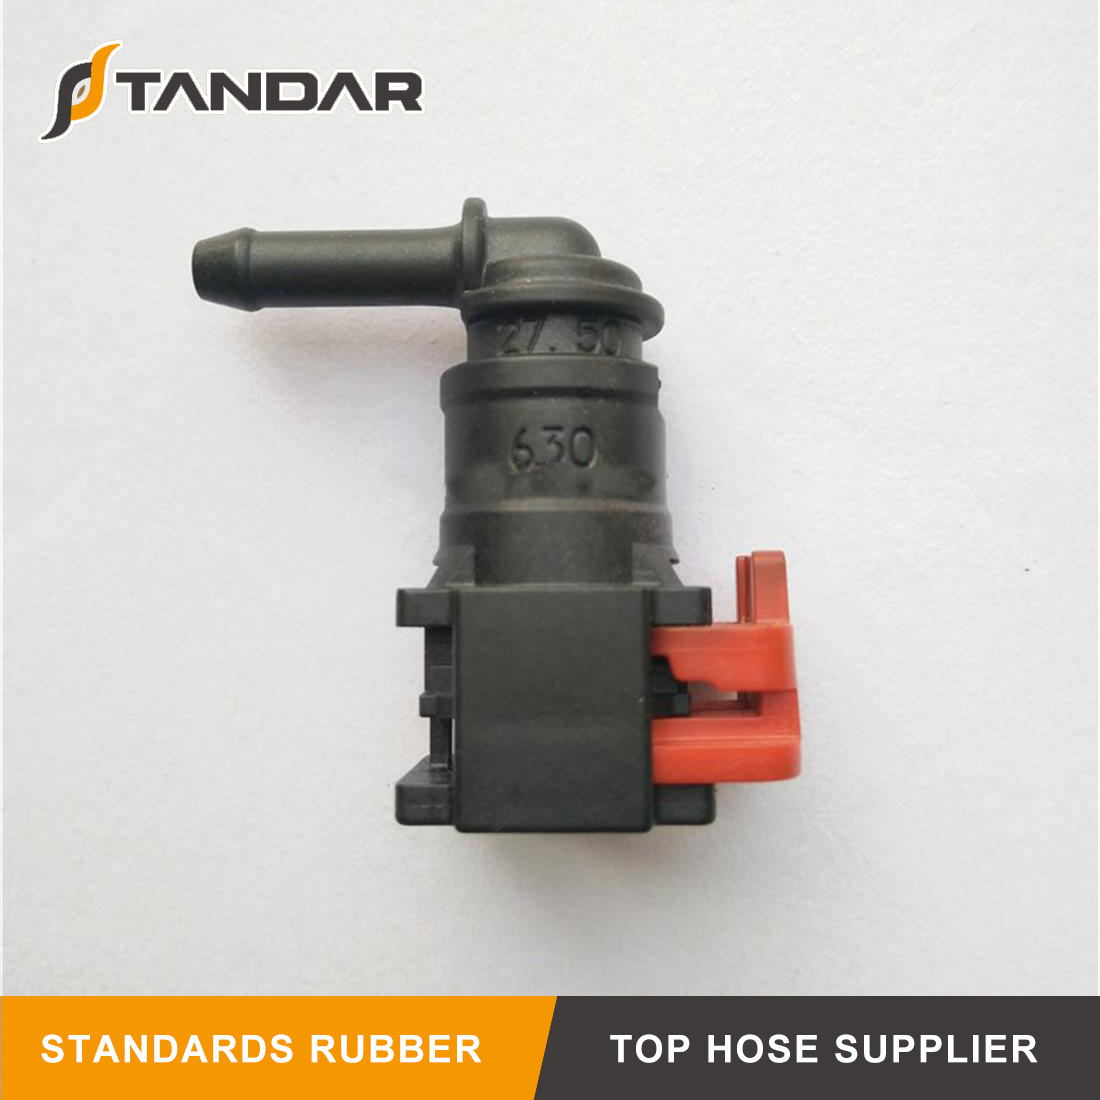 SAE 6.30 SCR Urea Quick Connector for Truck System